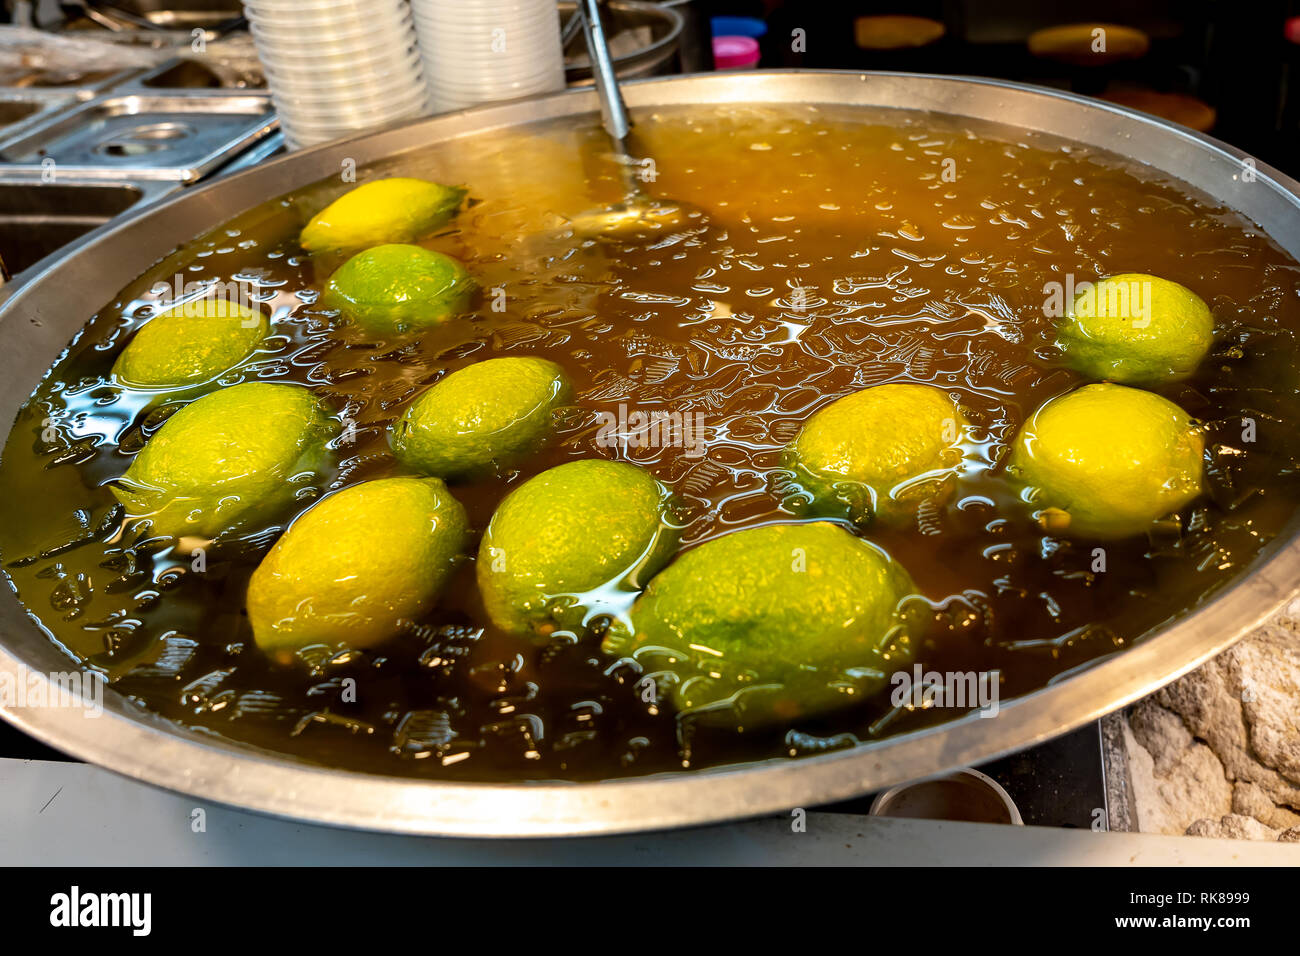 Taiwanese street foods - Aiyu Jelly at a street food vendor in Taiwan AiYu Jelly is one of Taiwan's famous summer drinks and desserts. Stock Photo